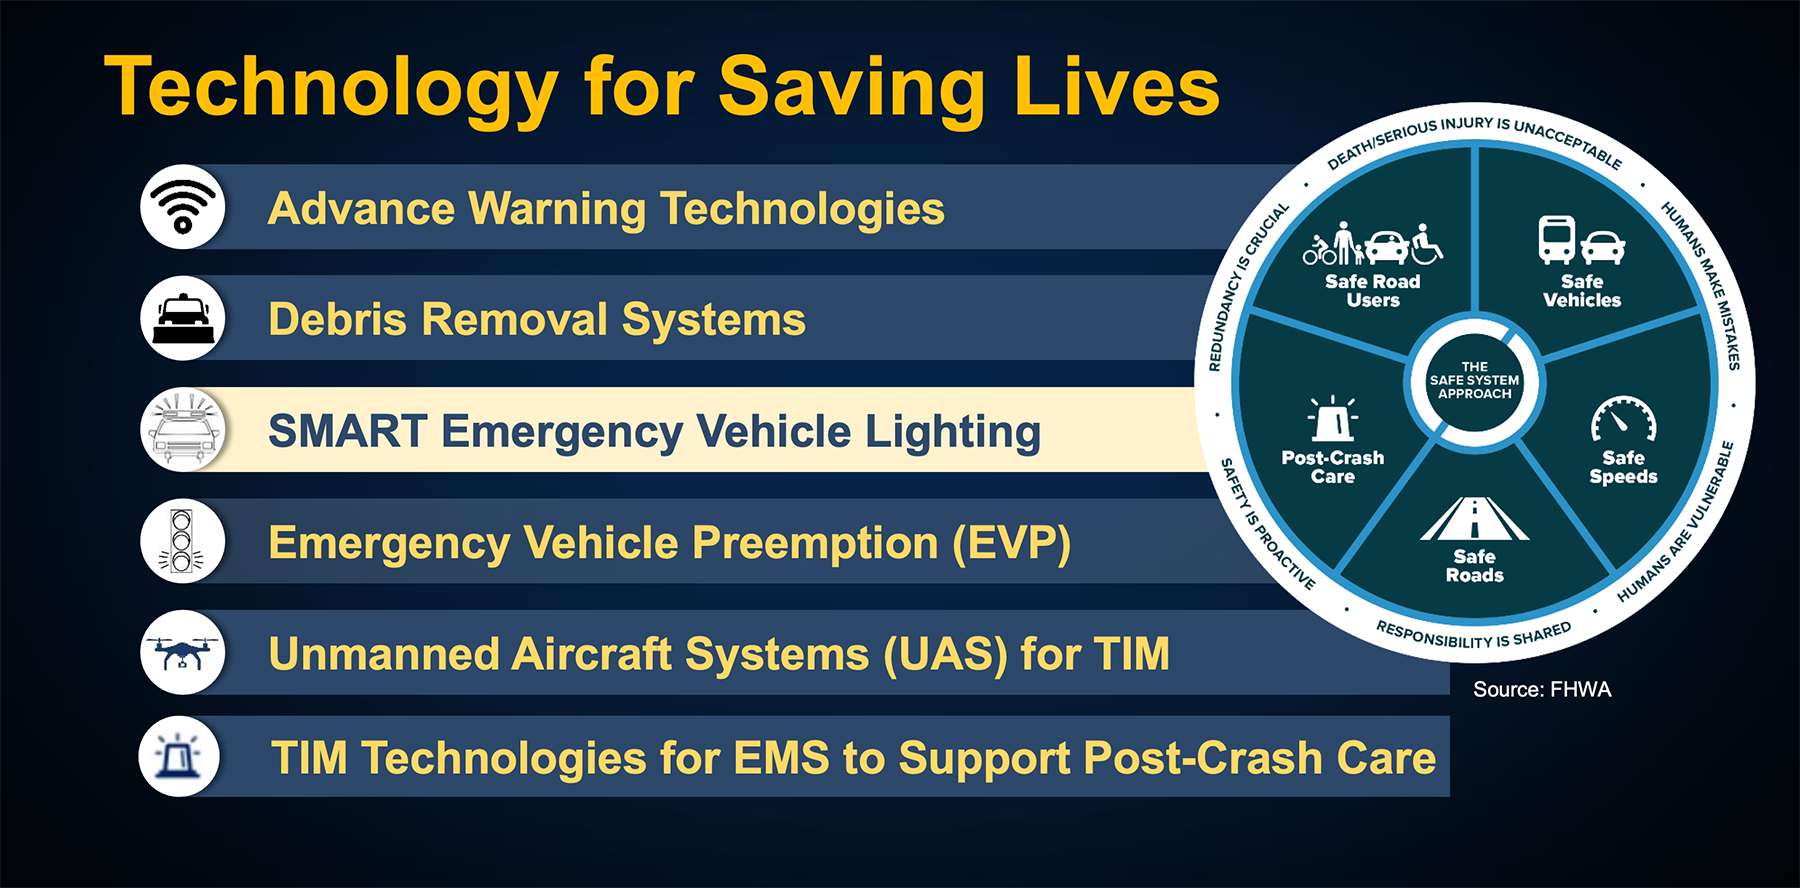 Technology for Saving Lives graphic.